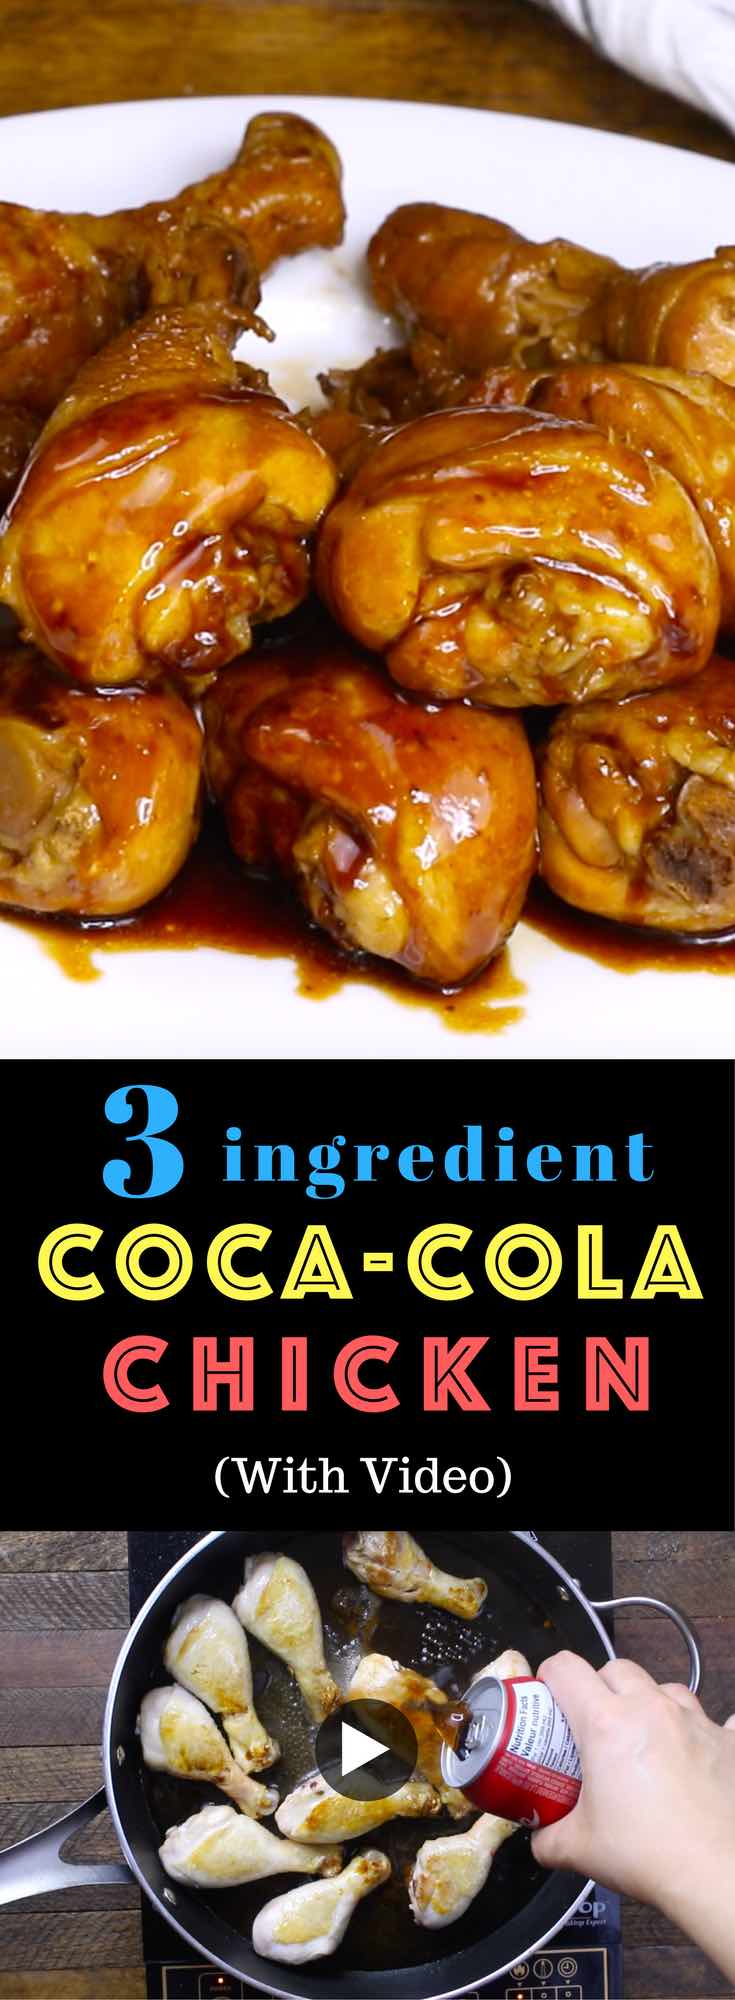 Super Easy Coca Cola Chicken – This easiest Coca Cola Chicken comes together in about 20 minutes. Unbelievably delicious and it’s really moist in texture! All you need is only 3 ingredients: Chicken wings or chicken drumsticks, Coca-Cola and soy sauce. Simply Yummy! Quick and easy dinner recipe. | tipbuzz.com